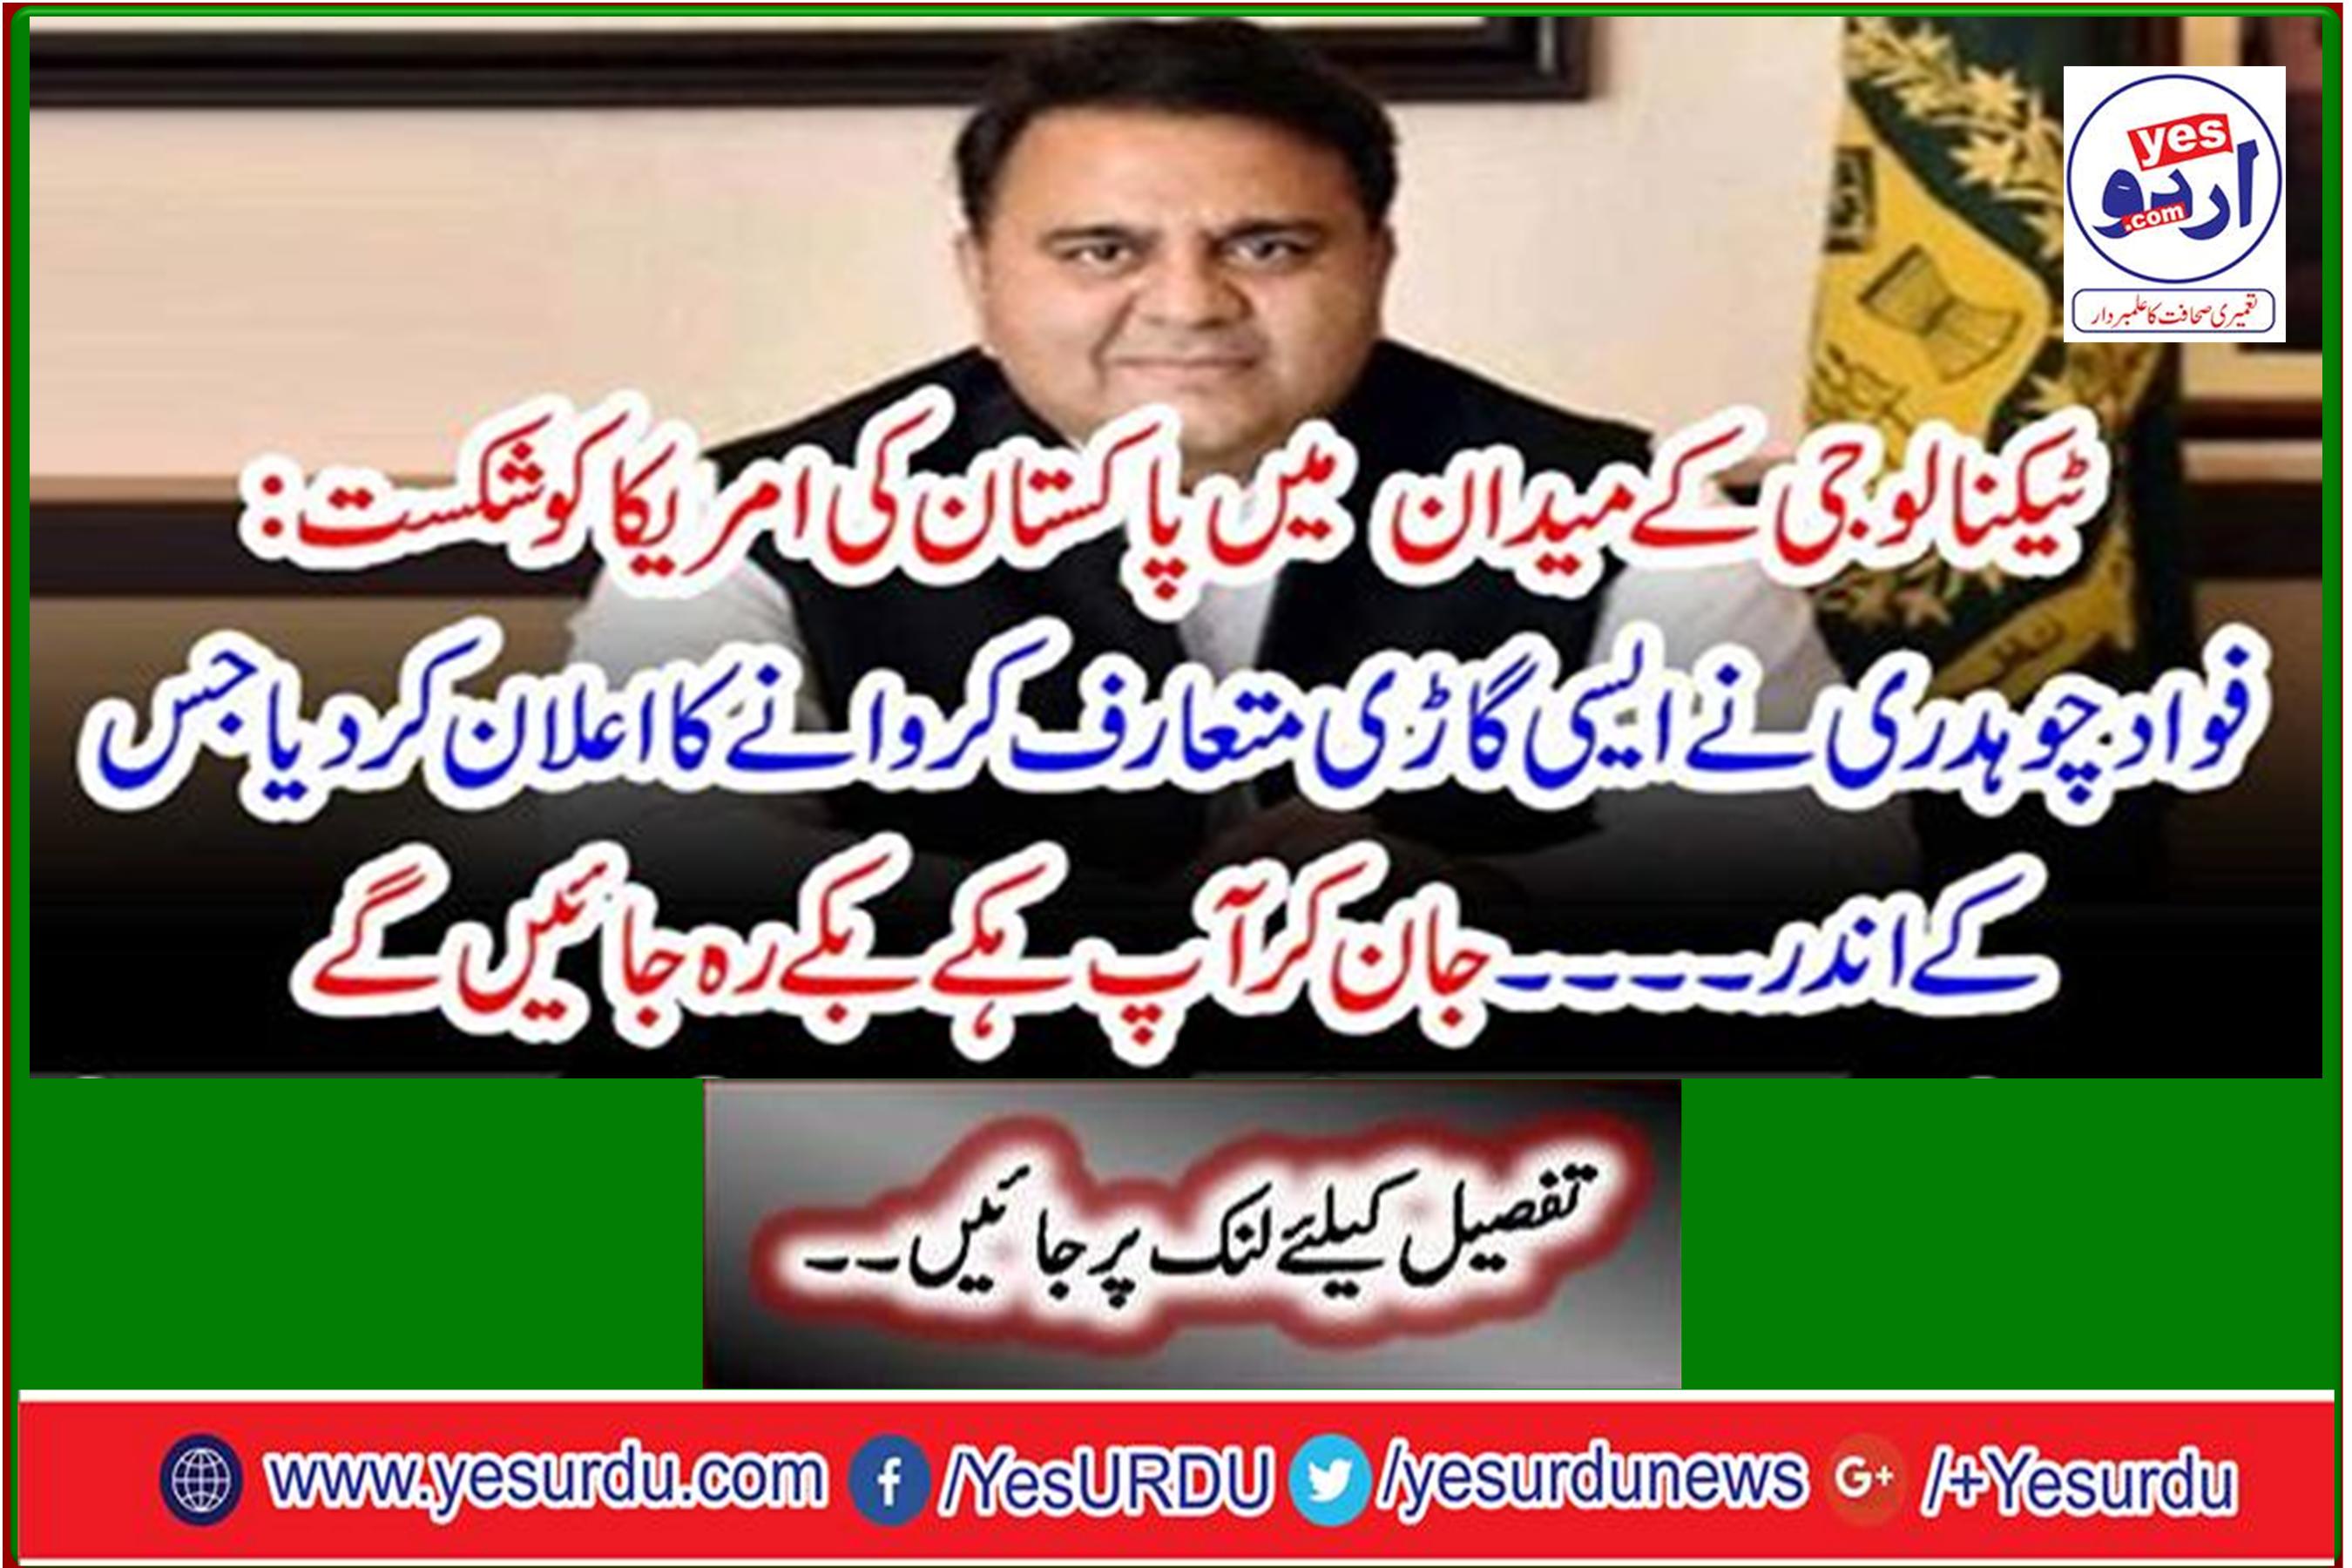 Fawad Chaudhry announces the introduction of a vehicle in which ... Knowing that you will be hungry